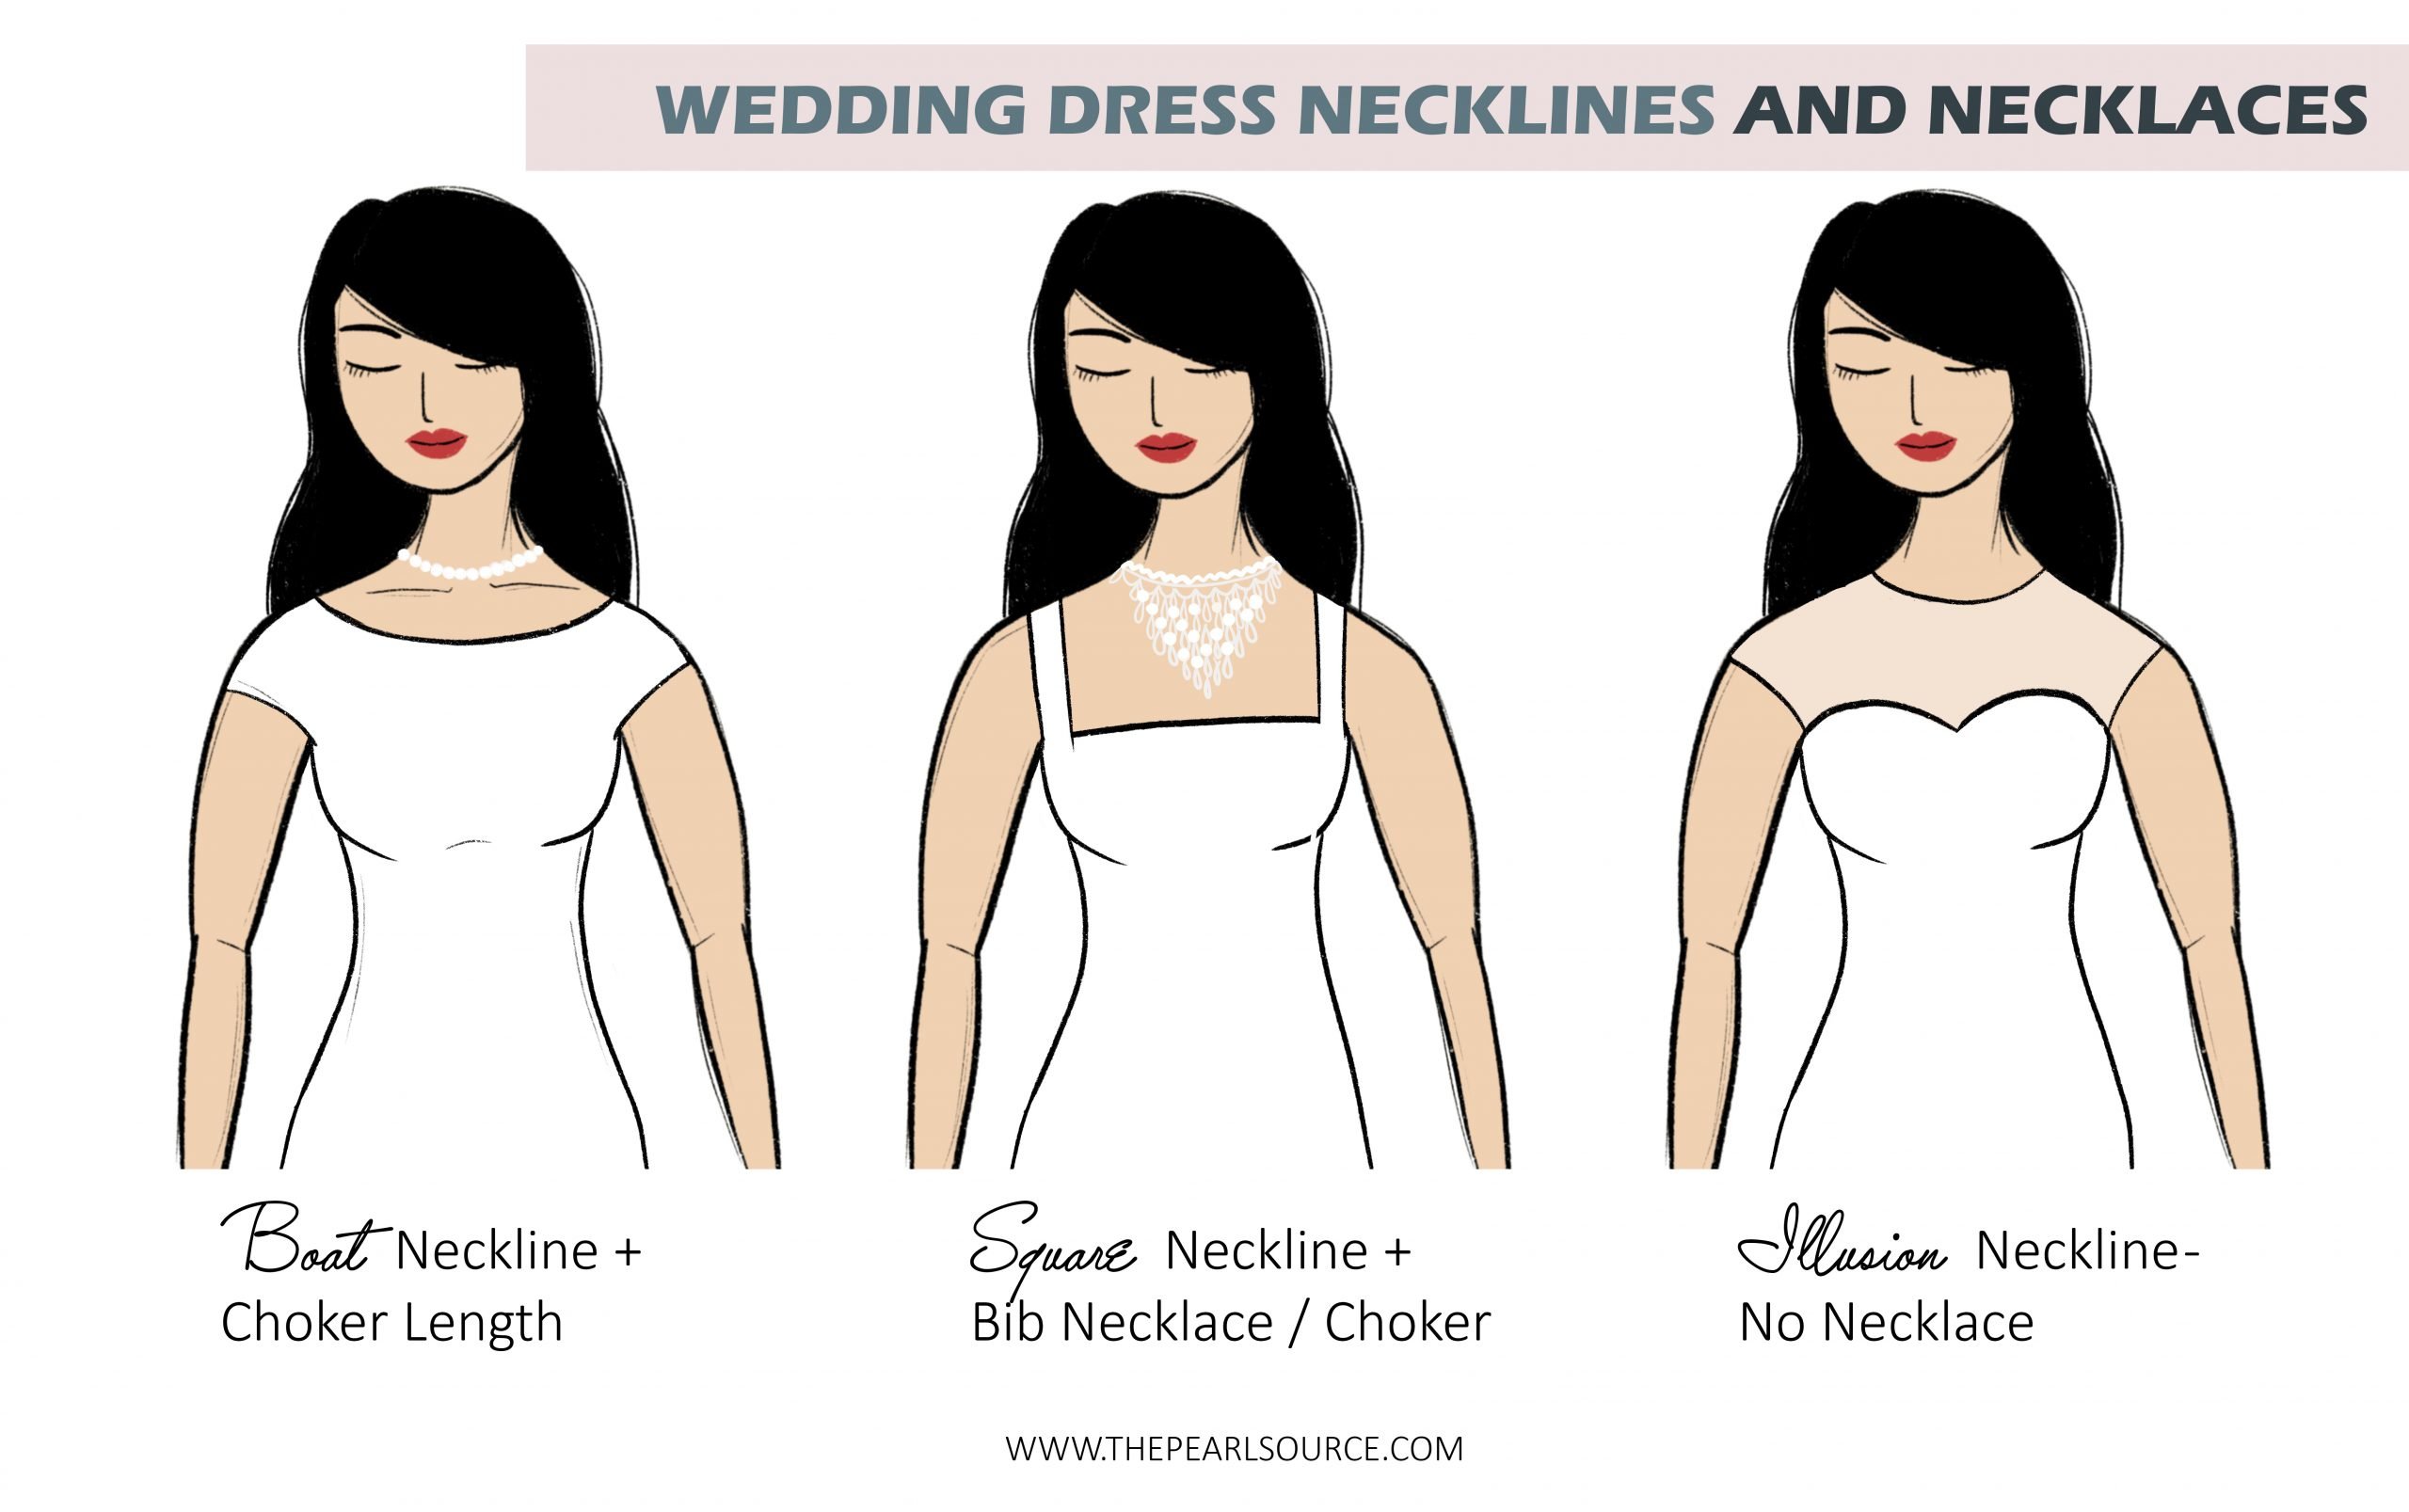 Image Of Necklace Lengths